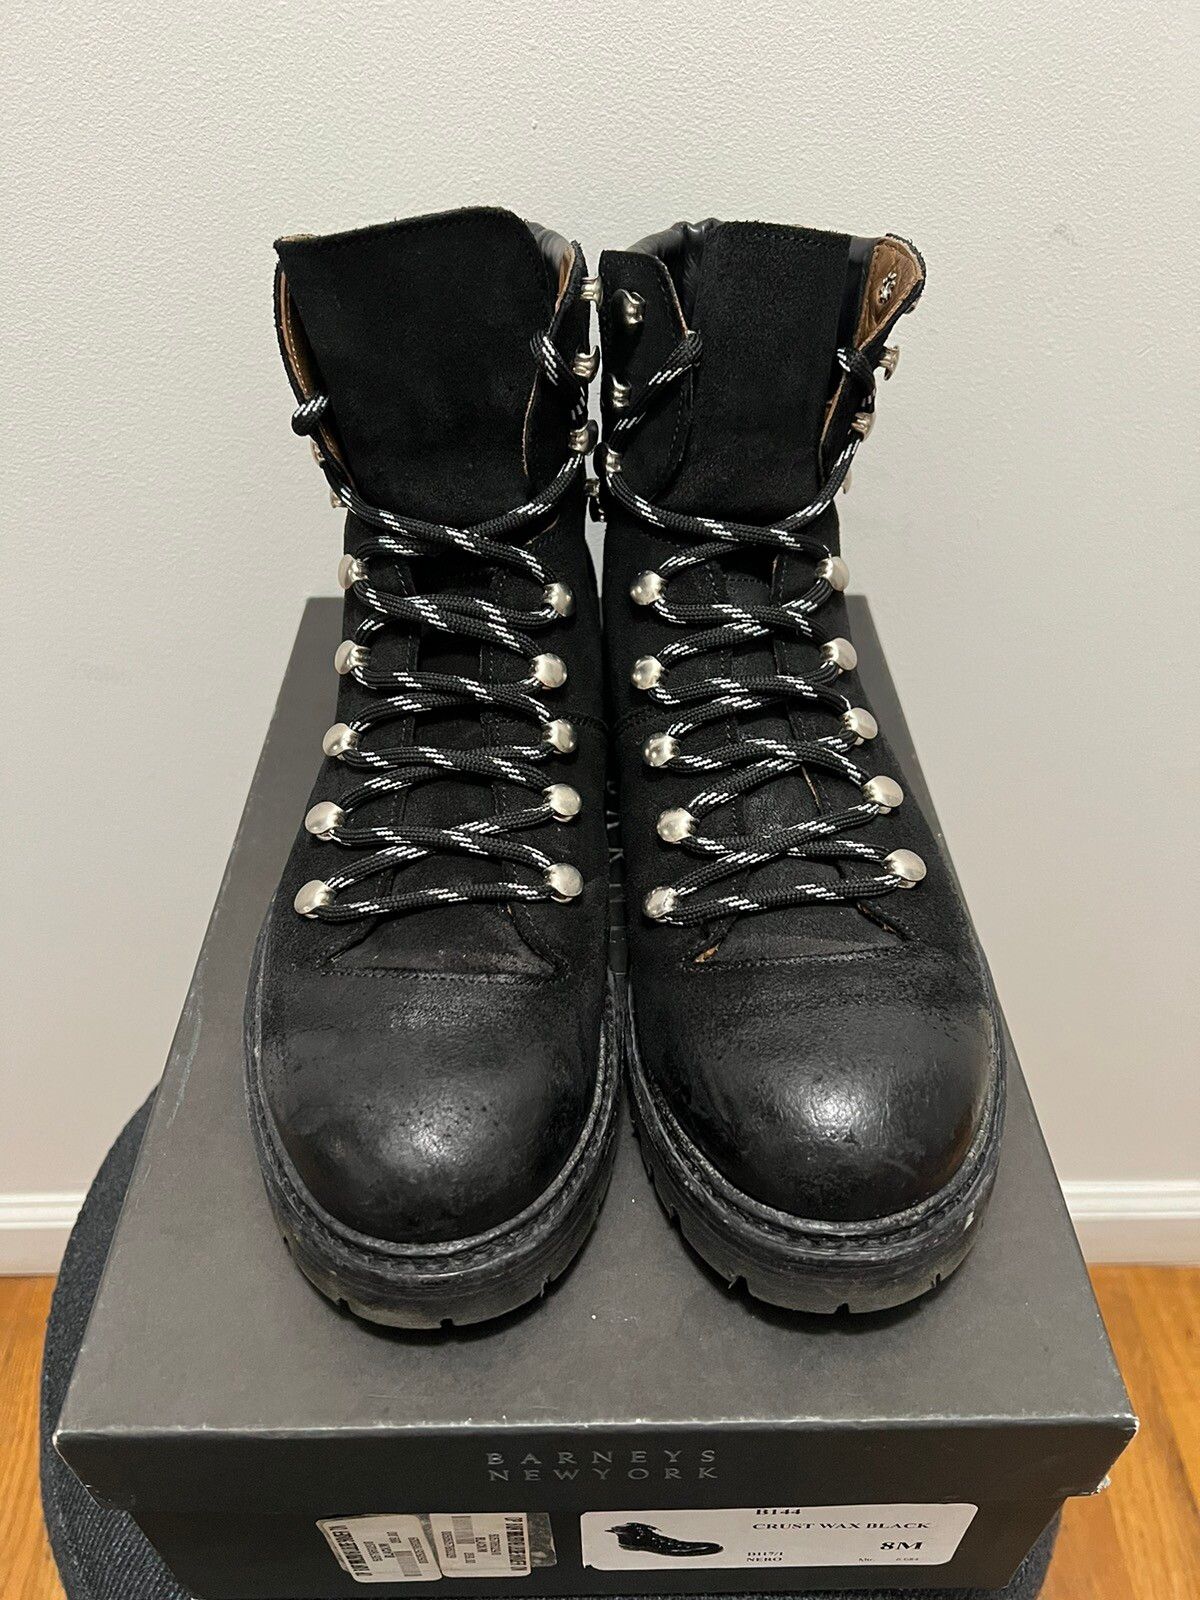 Barneys New York Vintage Barney’s New York Boots Size US 9.5 / EU 42-43 - 2 Preview